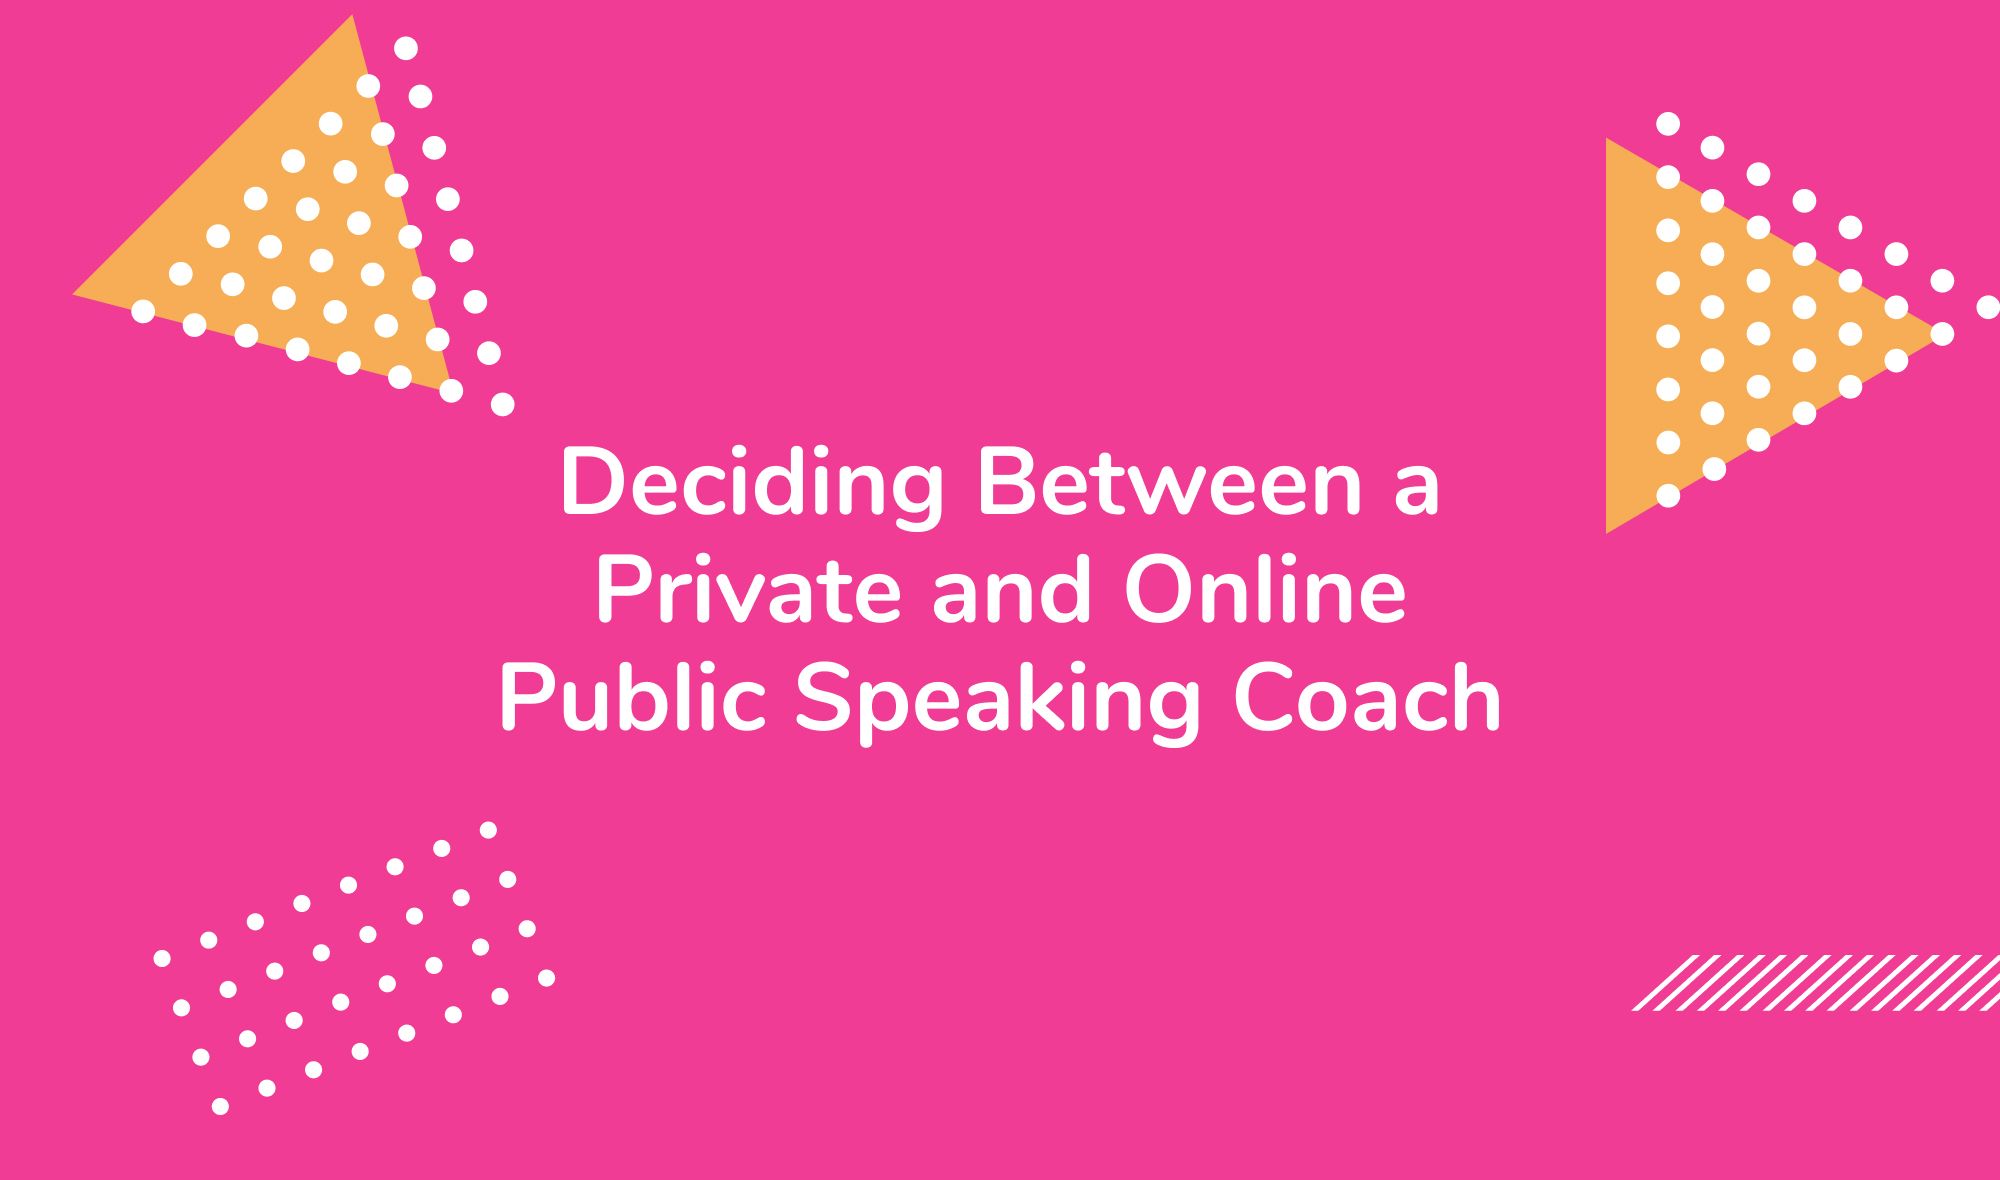 Deciding Between a Private and Online Public Speaking Coach